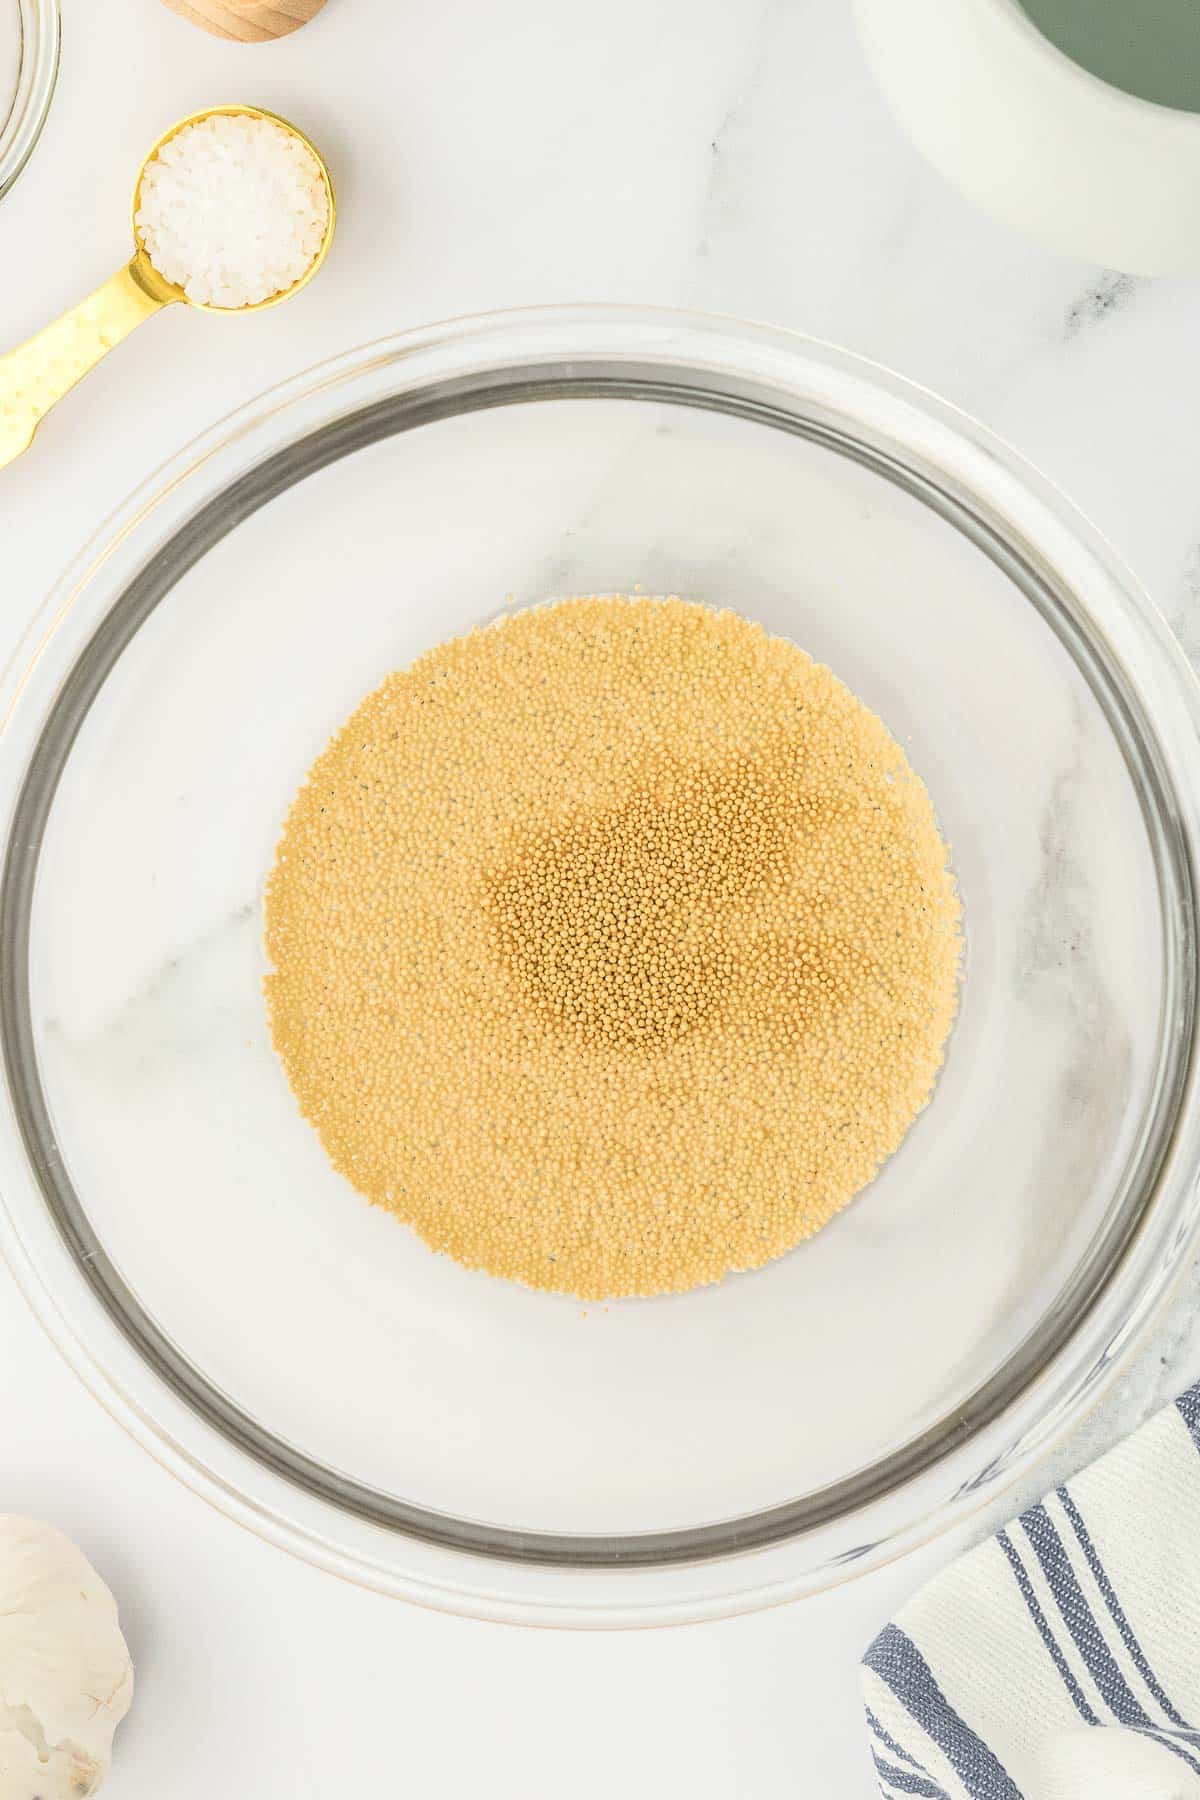 A large glass bowl containing yeast mixture.